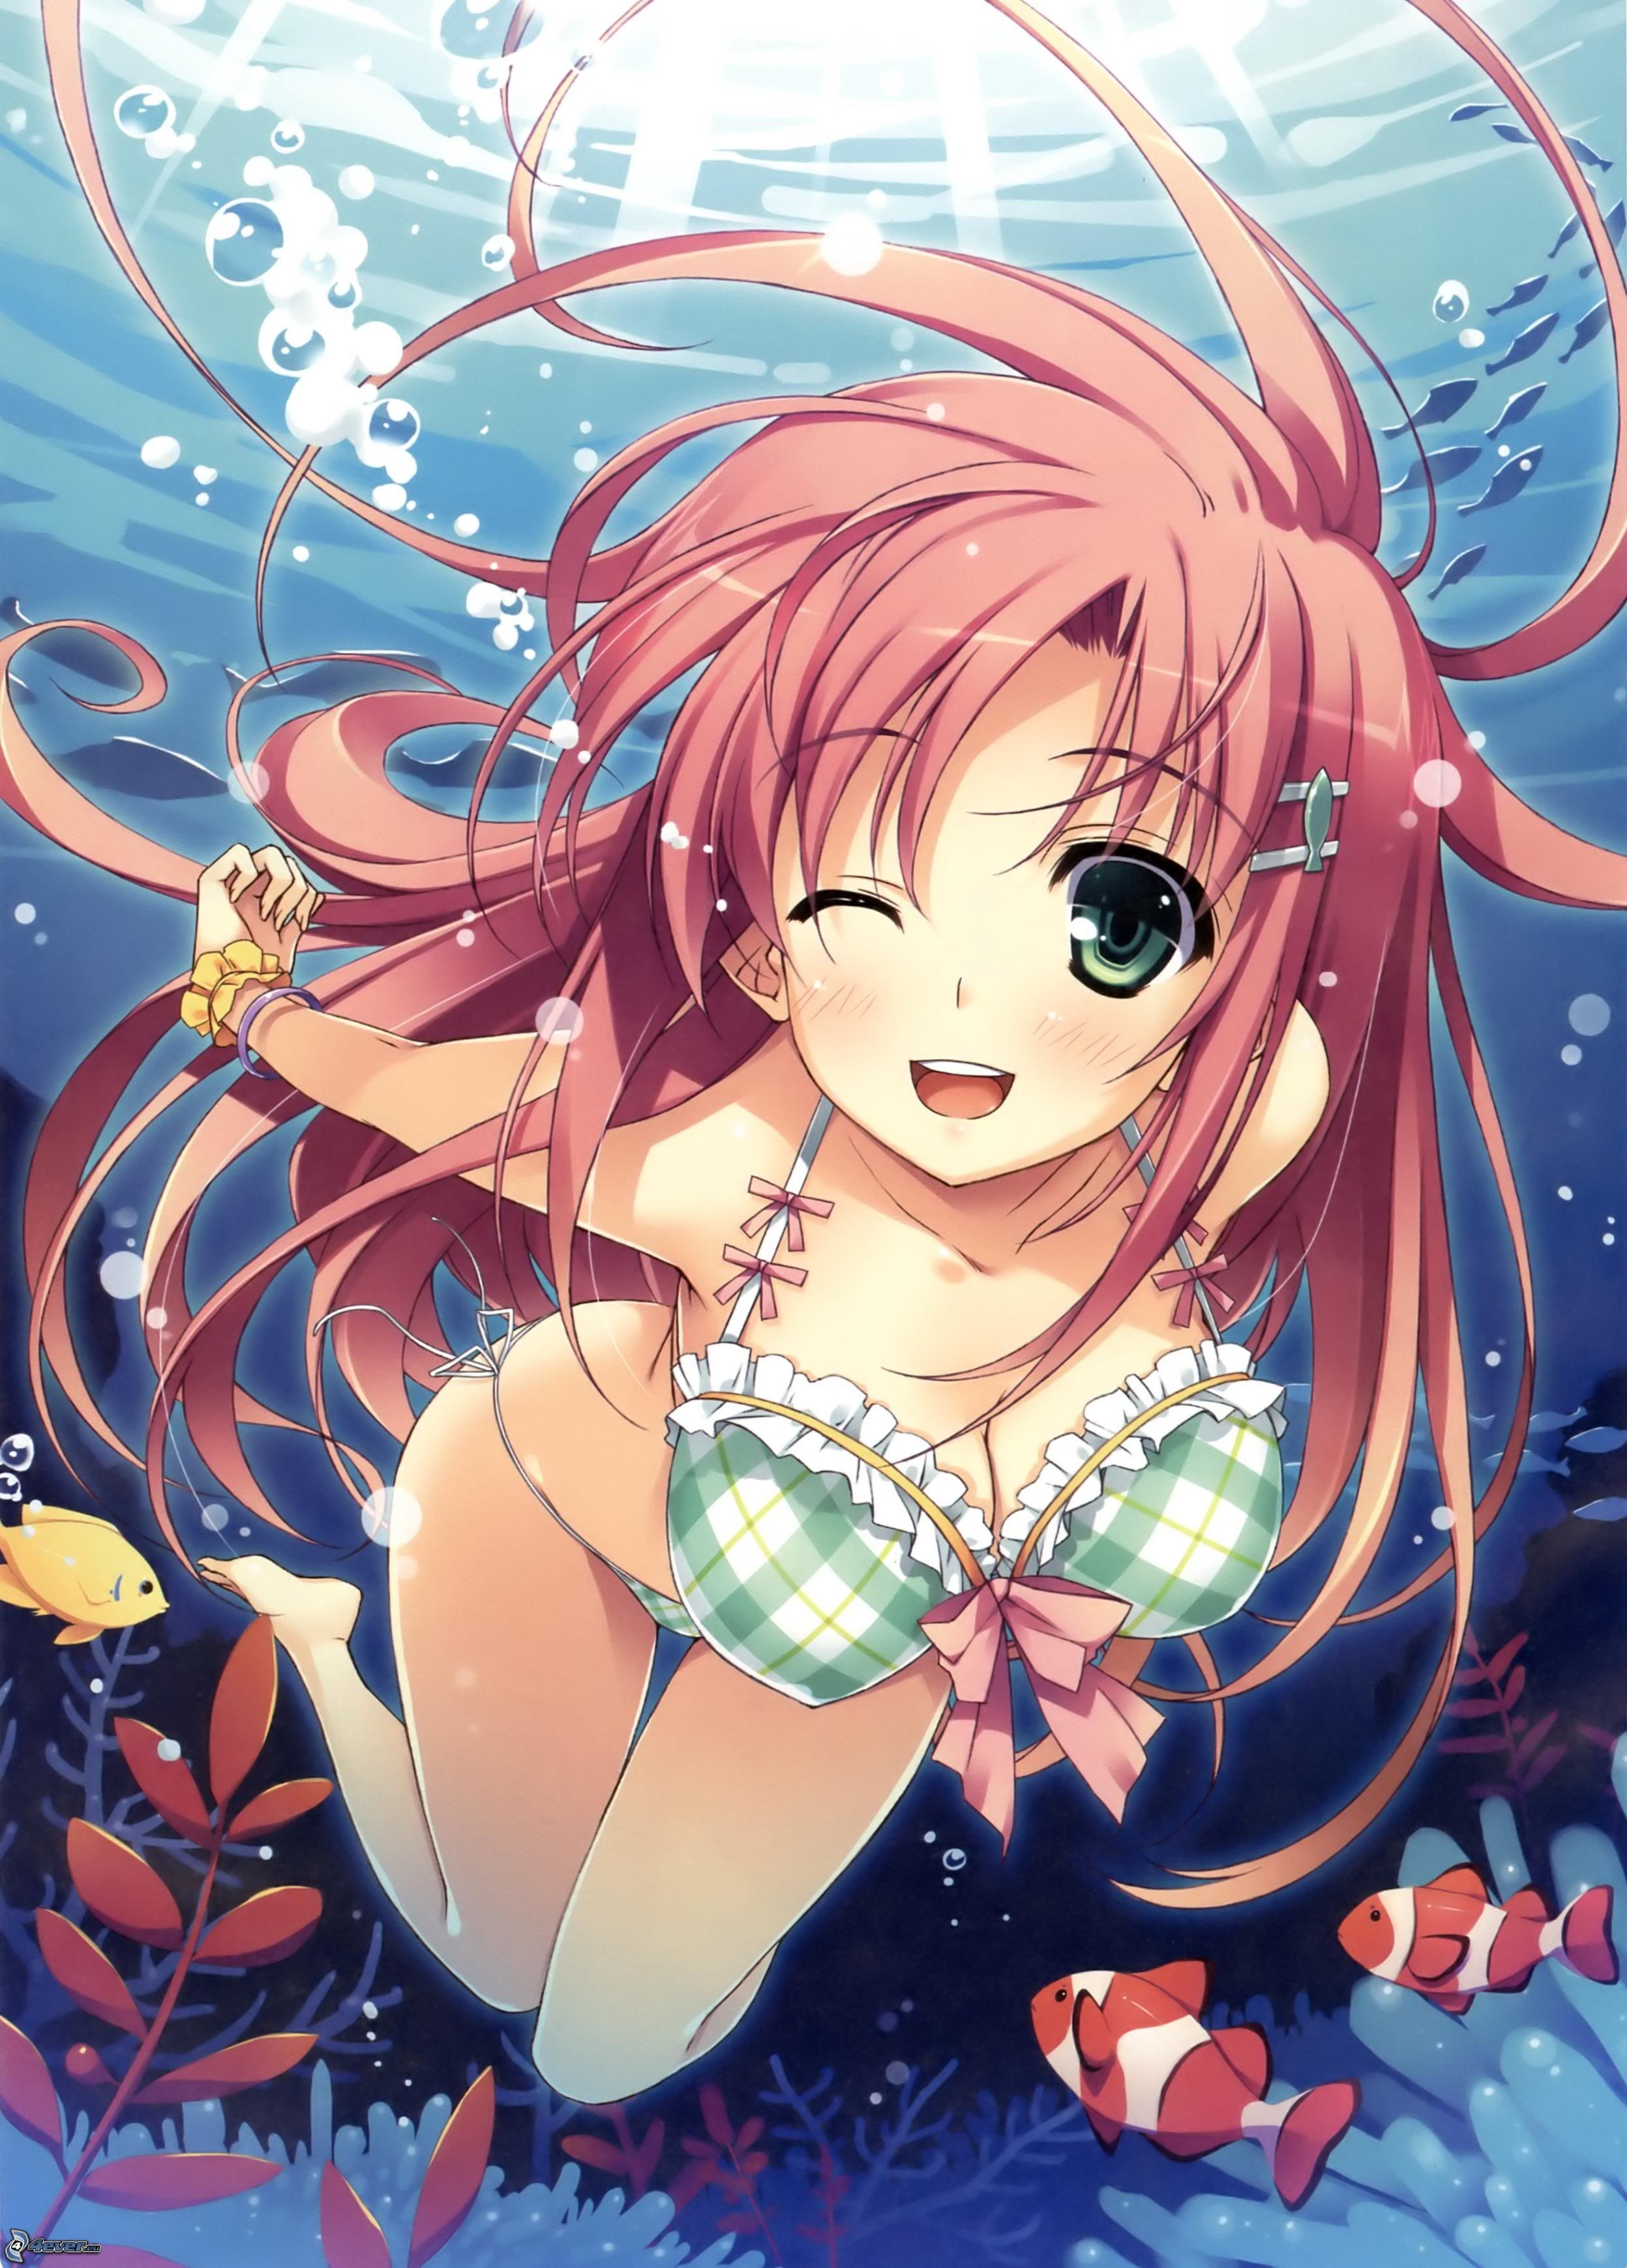 Fantasy Ocean Adventures Anime Girl Swimming With the Fish -  Hong Kong